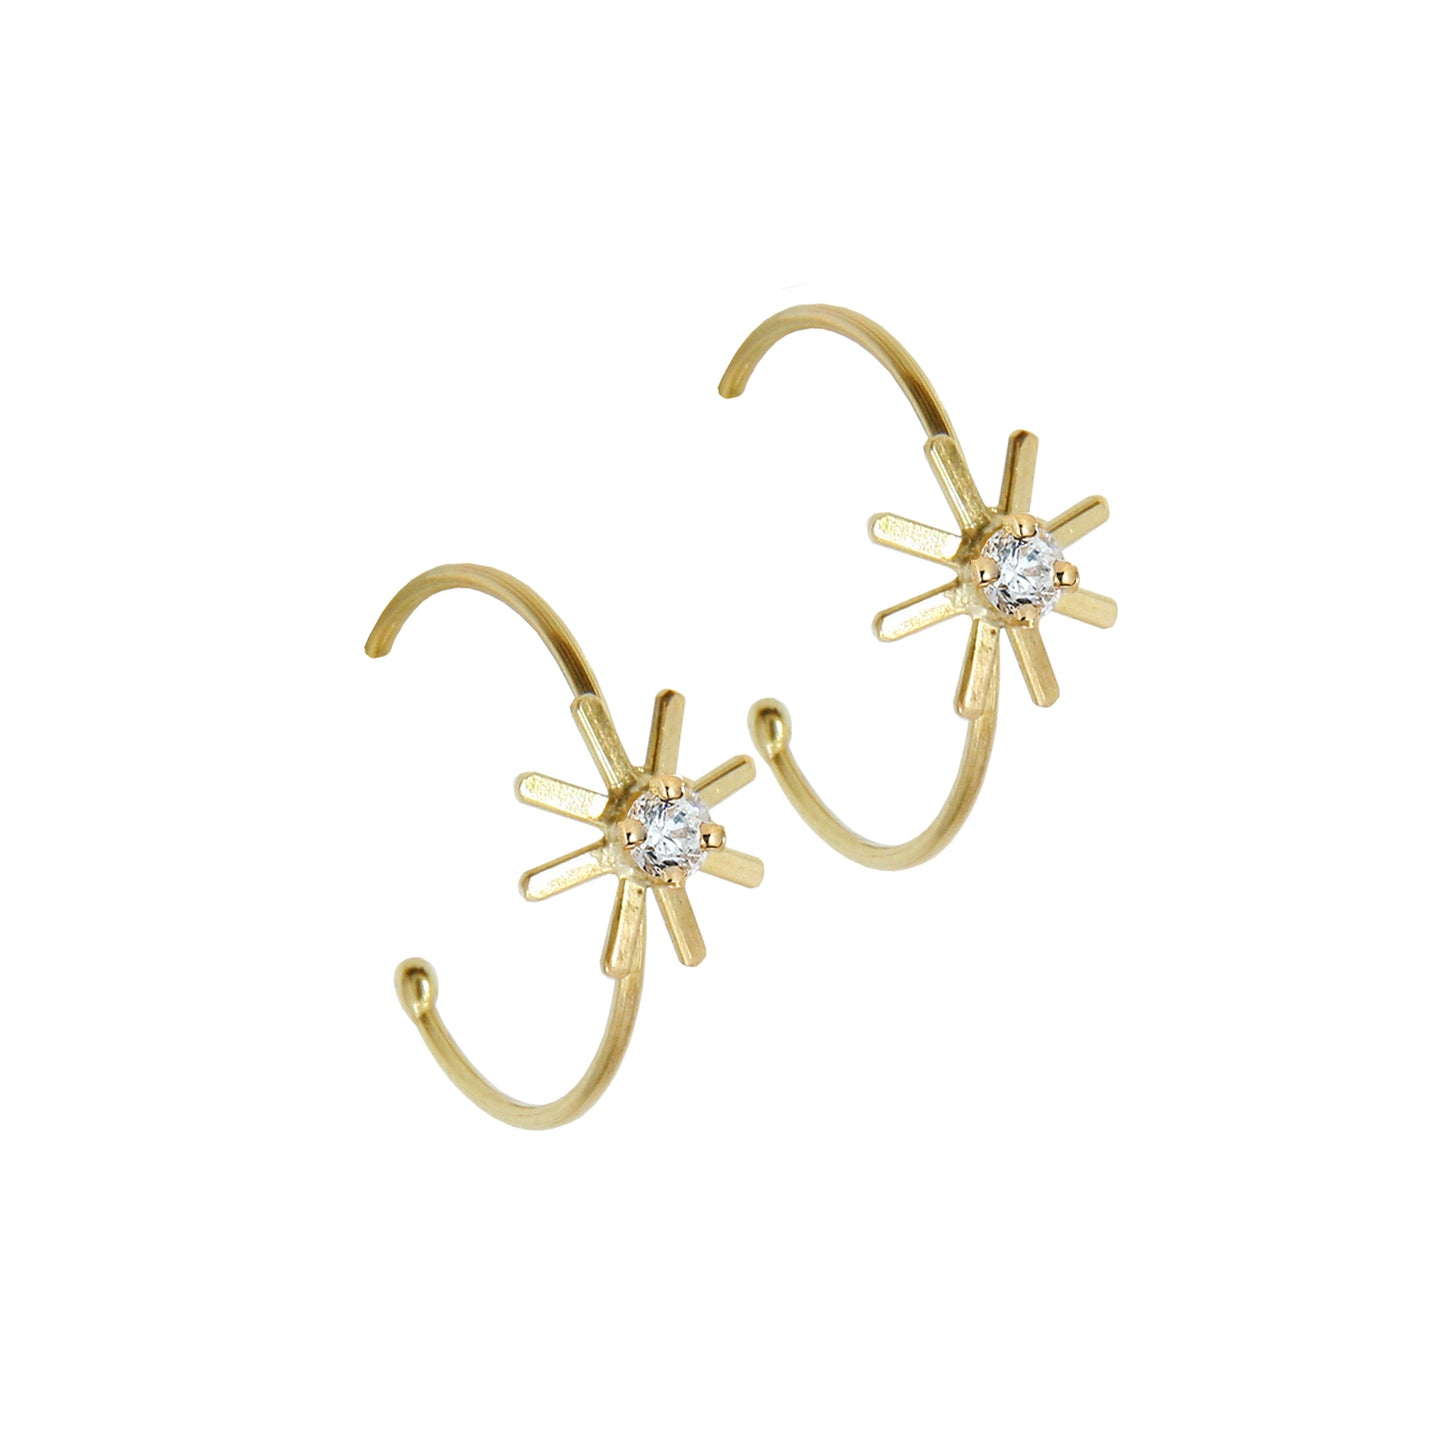 These 18ct yellow gold fine diamond hoop earrings are from our Pop Up Daisy Collection. The Flower motif is made up from fine gold petals and features a central Diamond set collet.